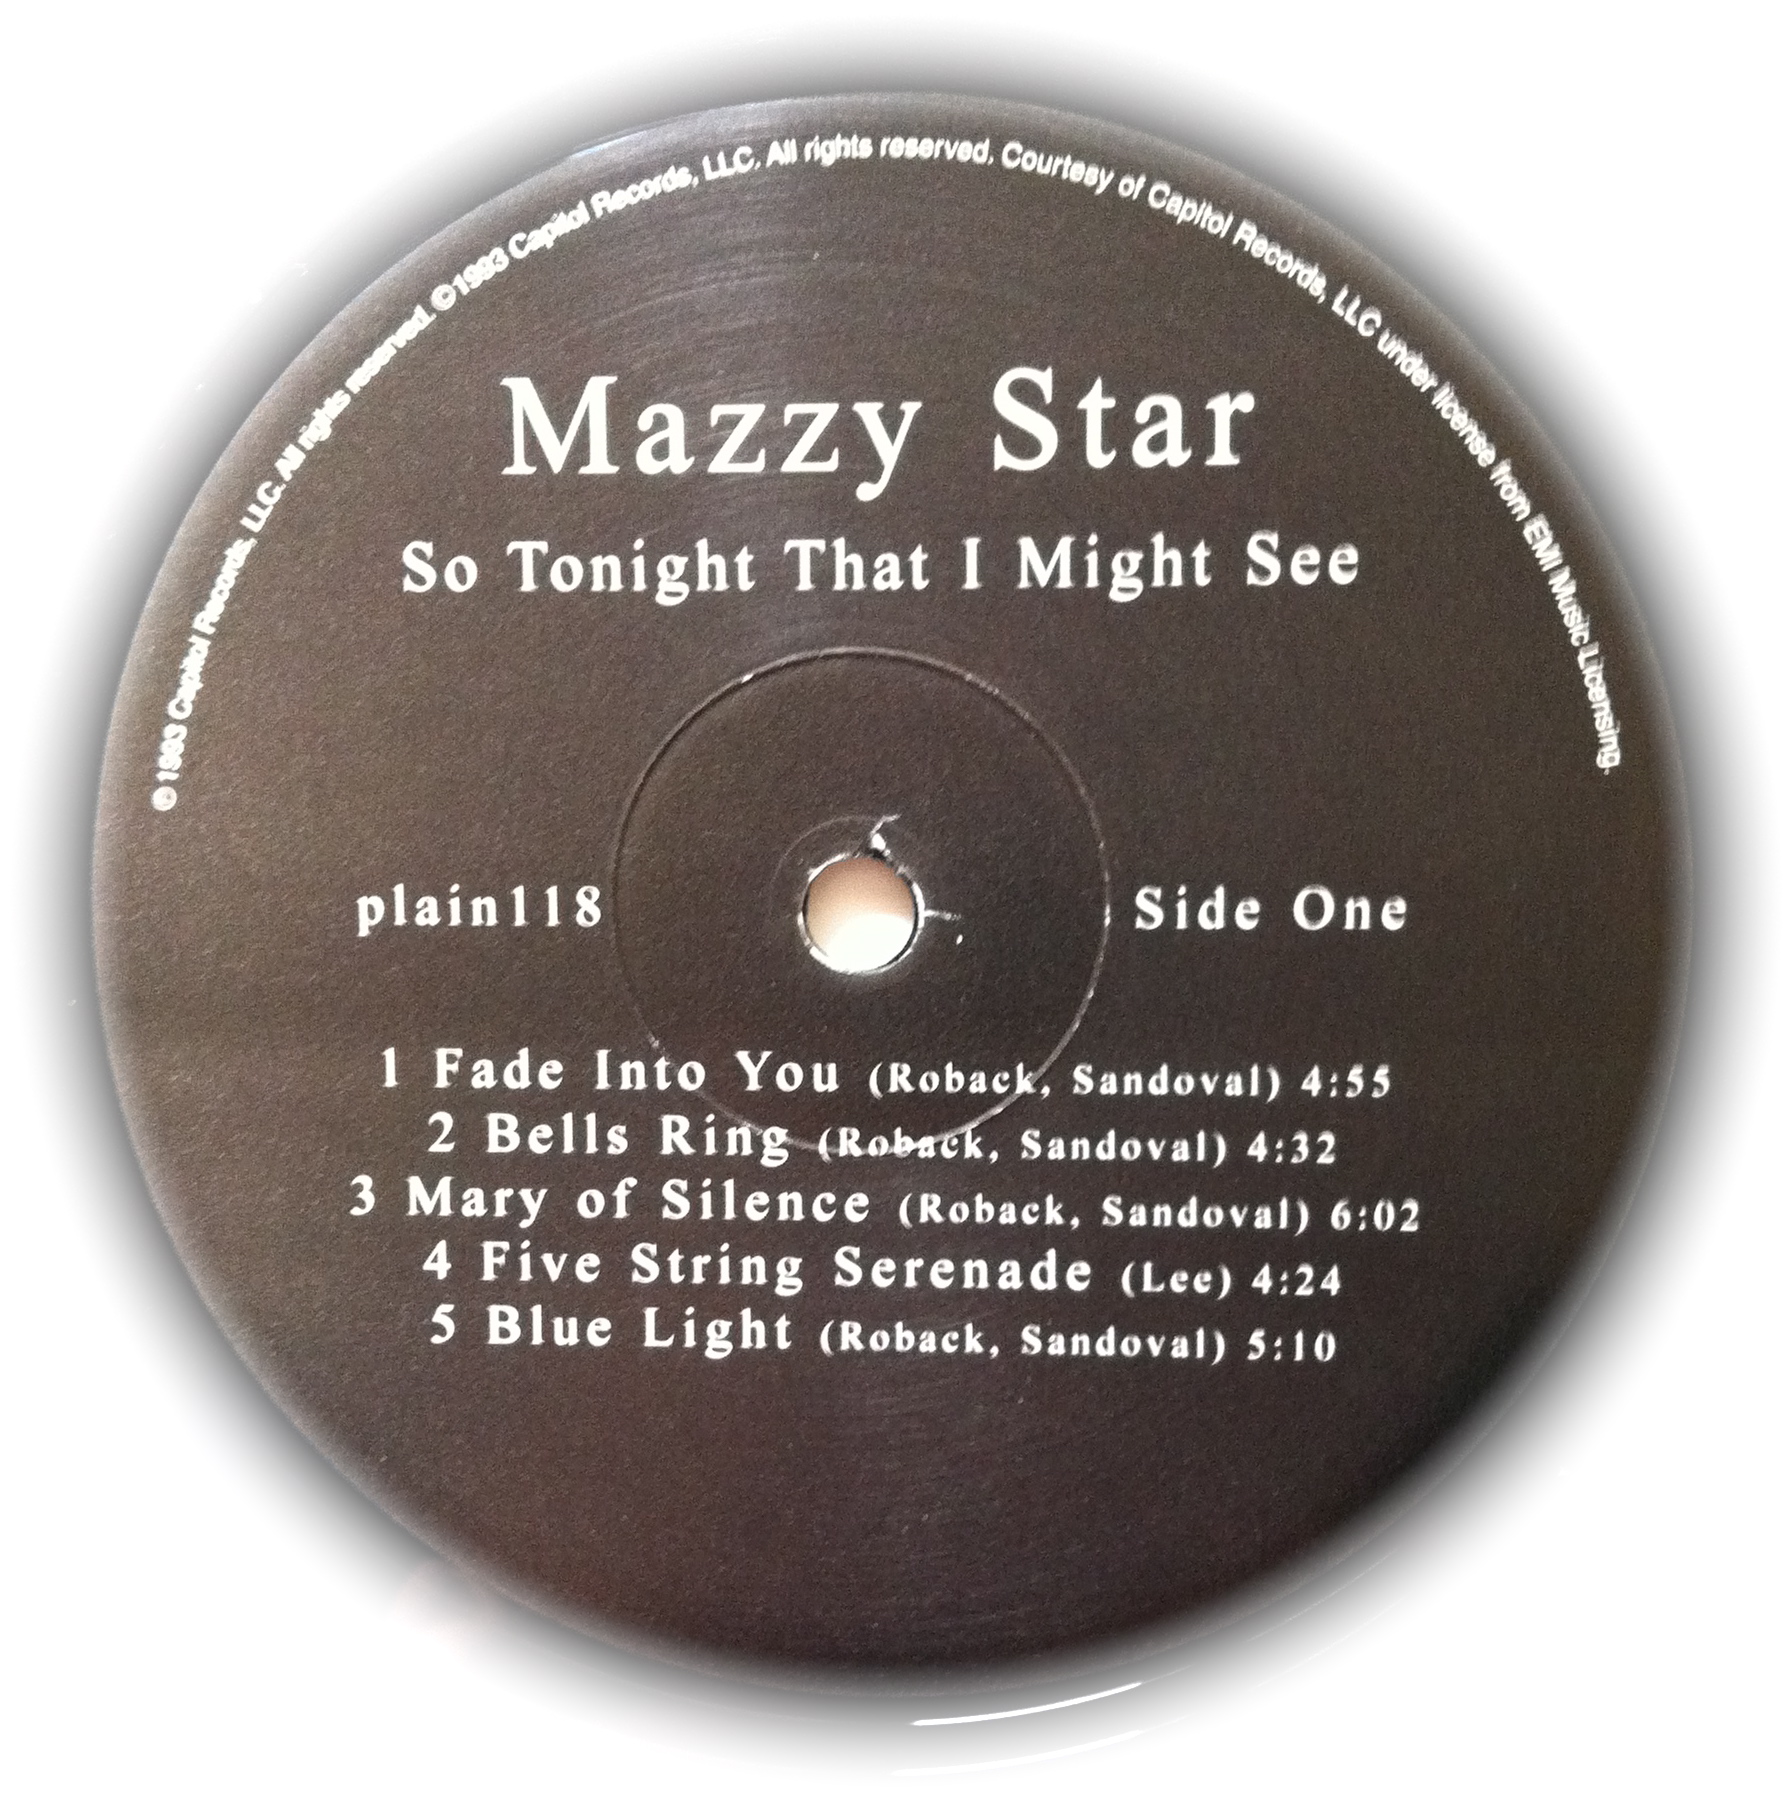 mazzy star so tonight that i might see review